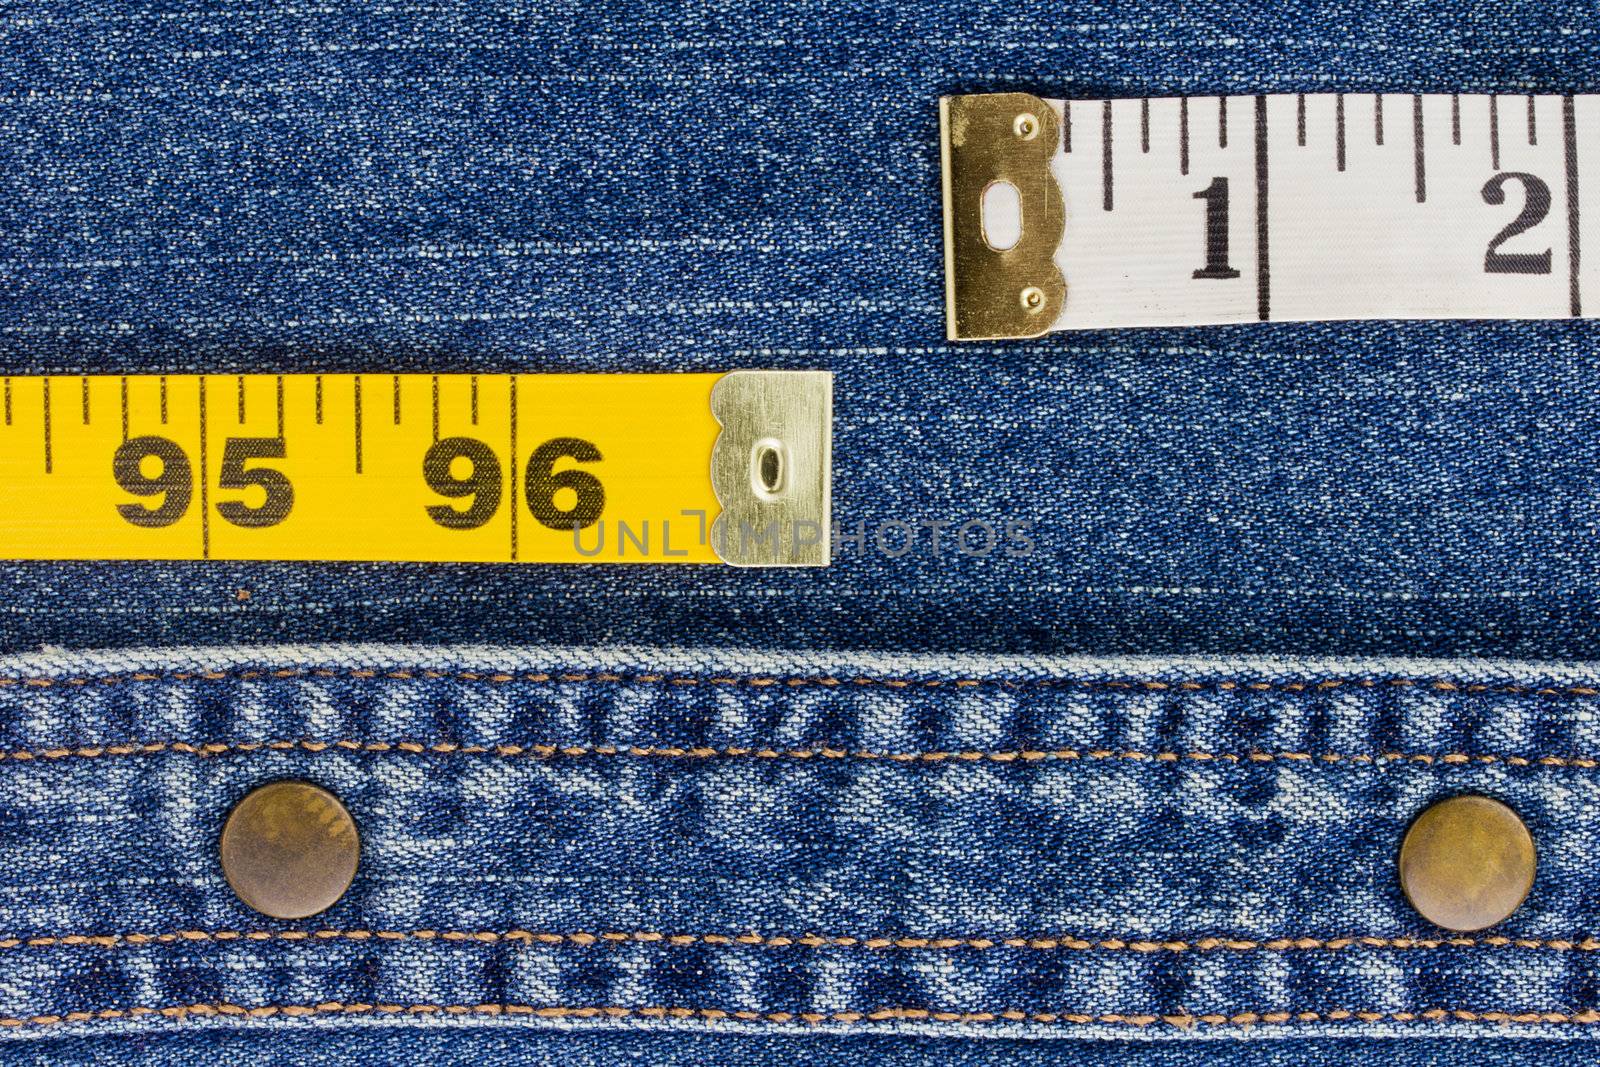 Close-up photograph of measuring tape on denim material.